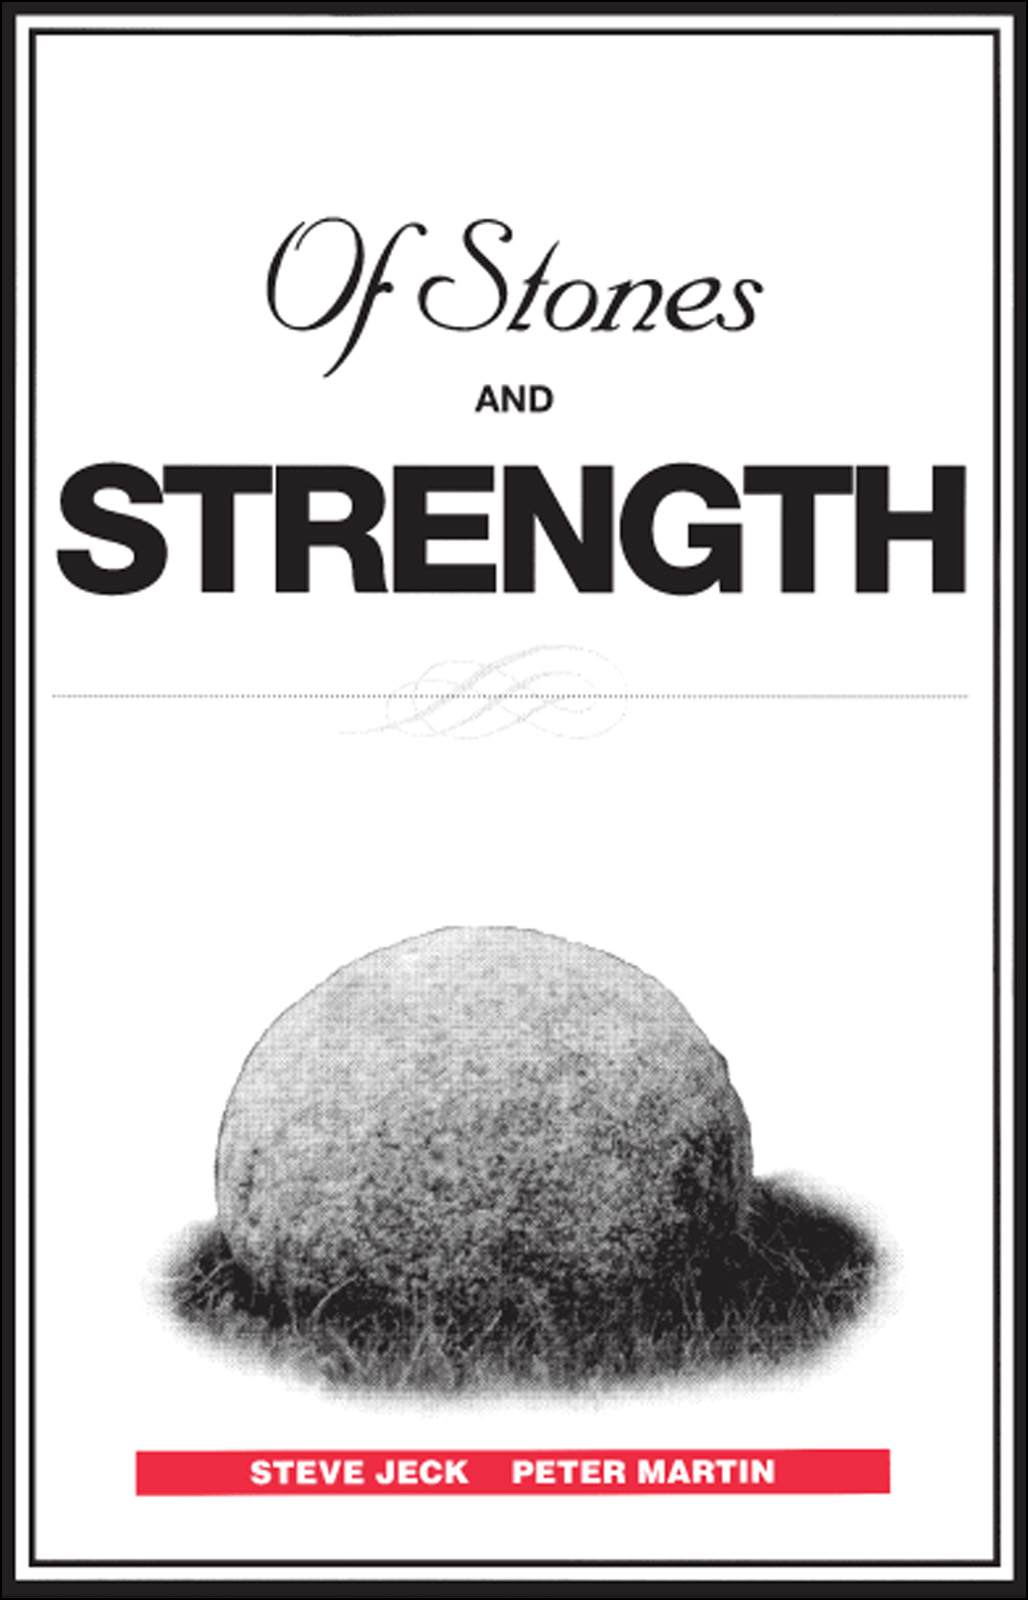 Of Stones And Strength, Steve Jeck and Peter Martin